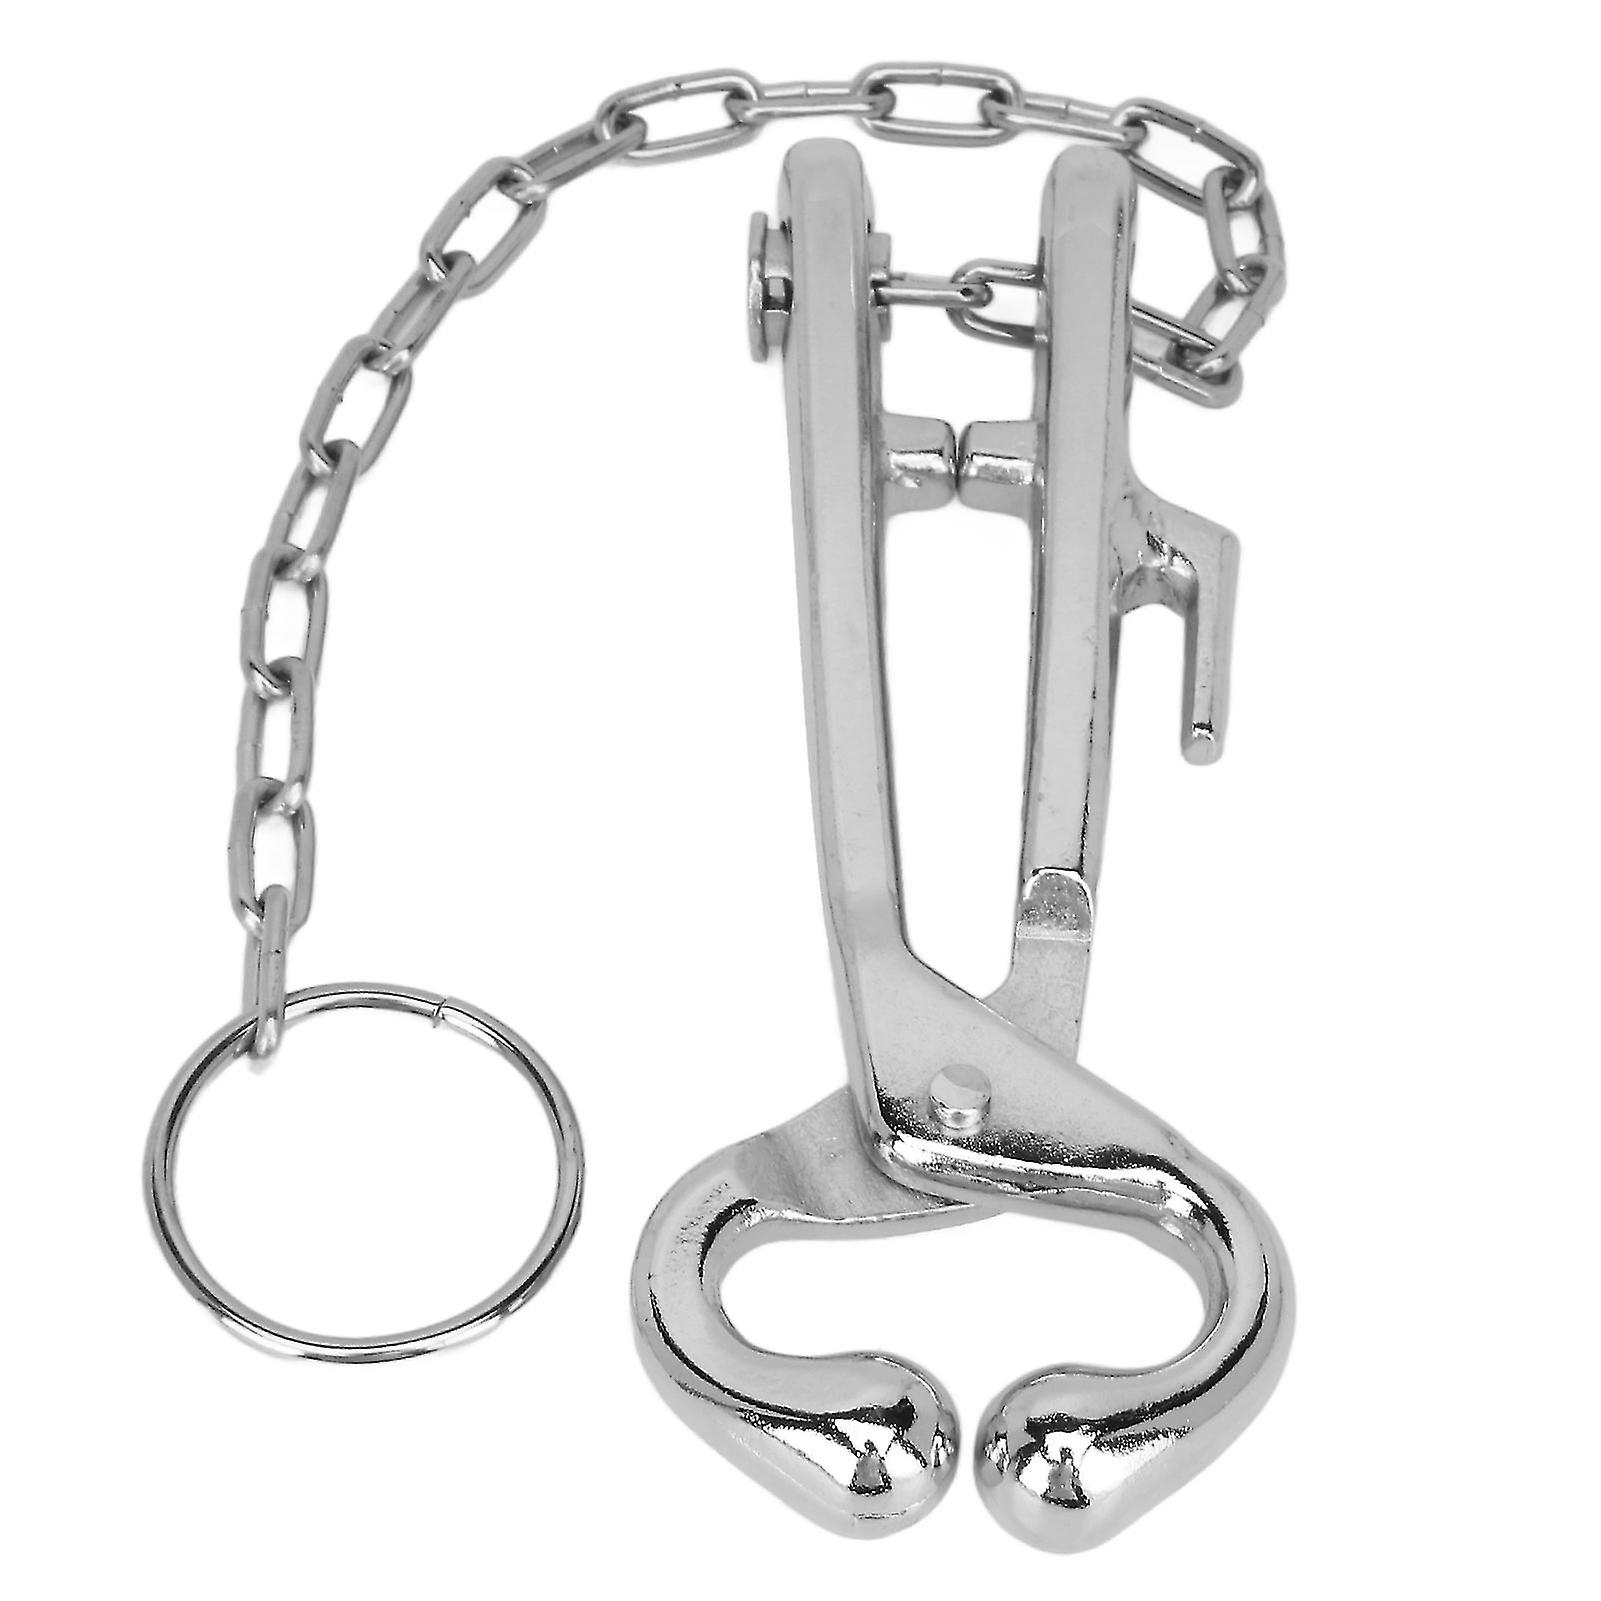 Cow Nose Pliers Stainless Steel Cattle Bull Nose Ring Pliers with Chain Pulling Tool for Farm Ranch Veterinary